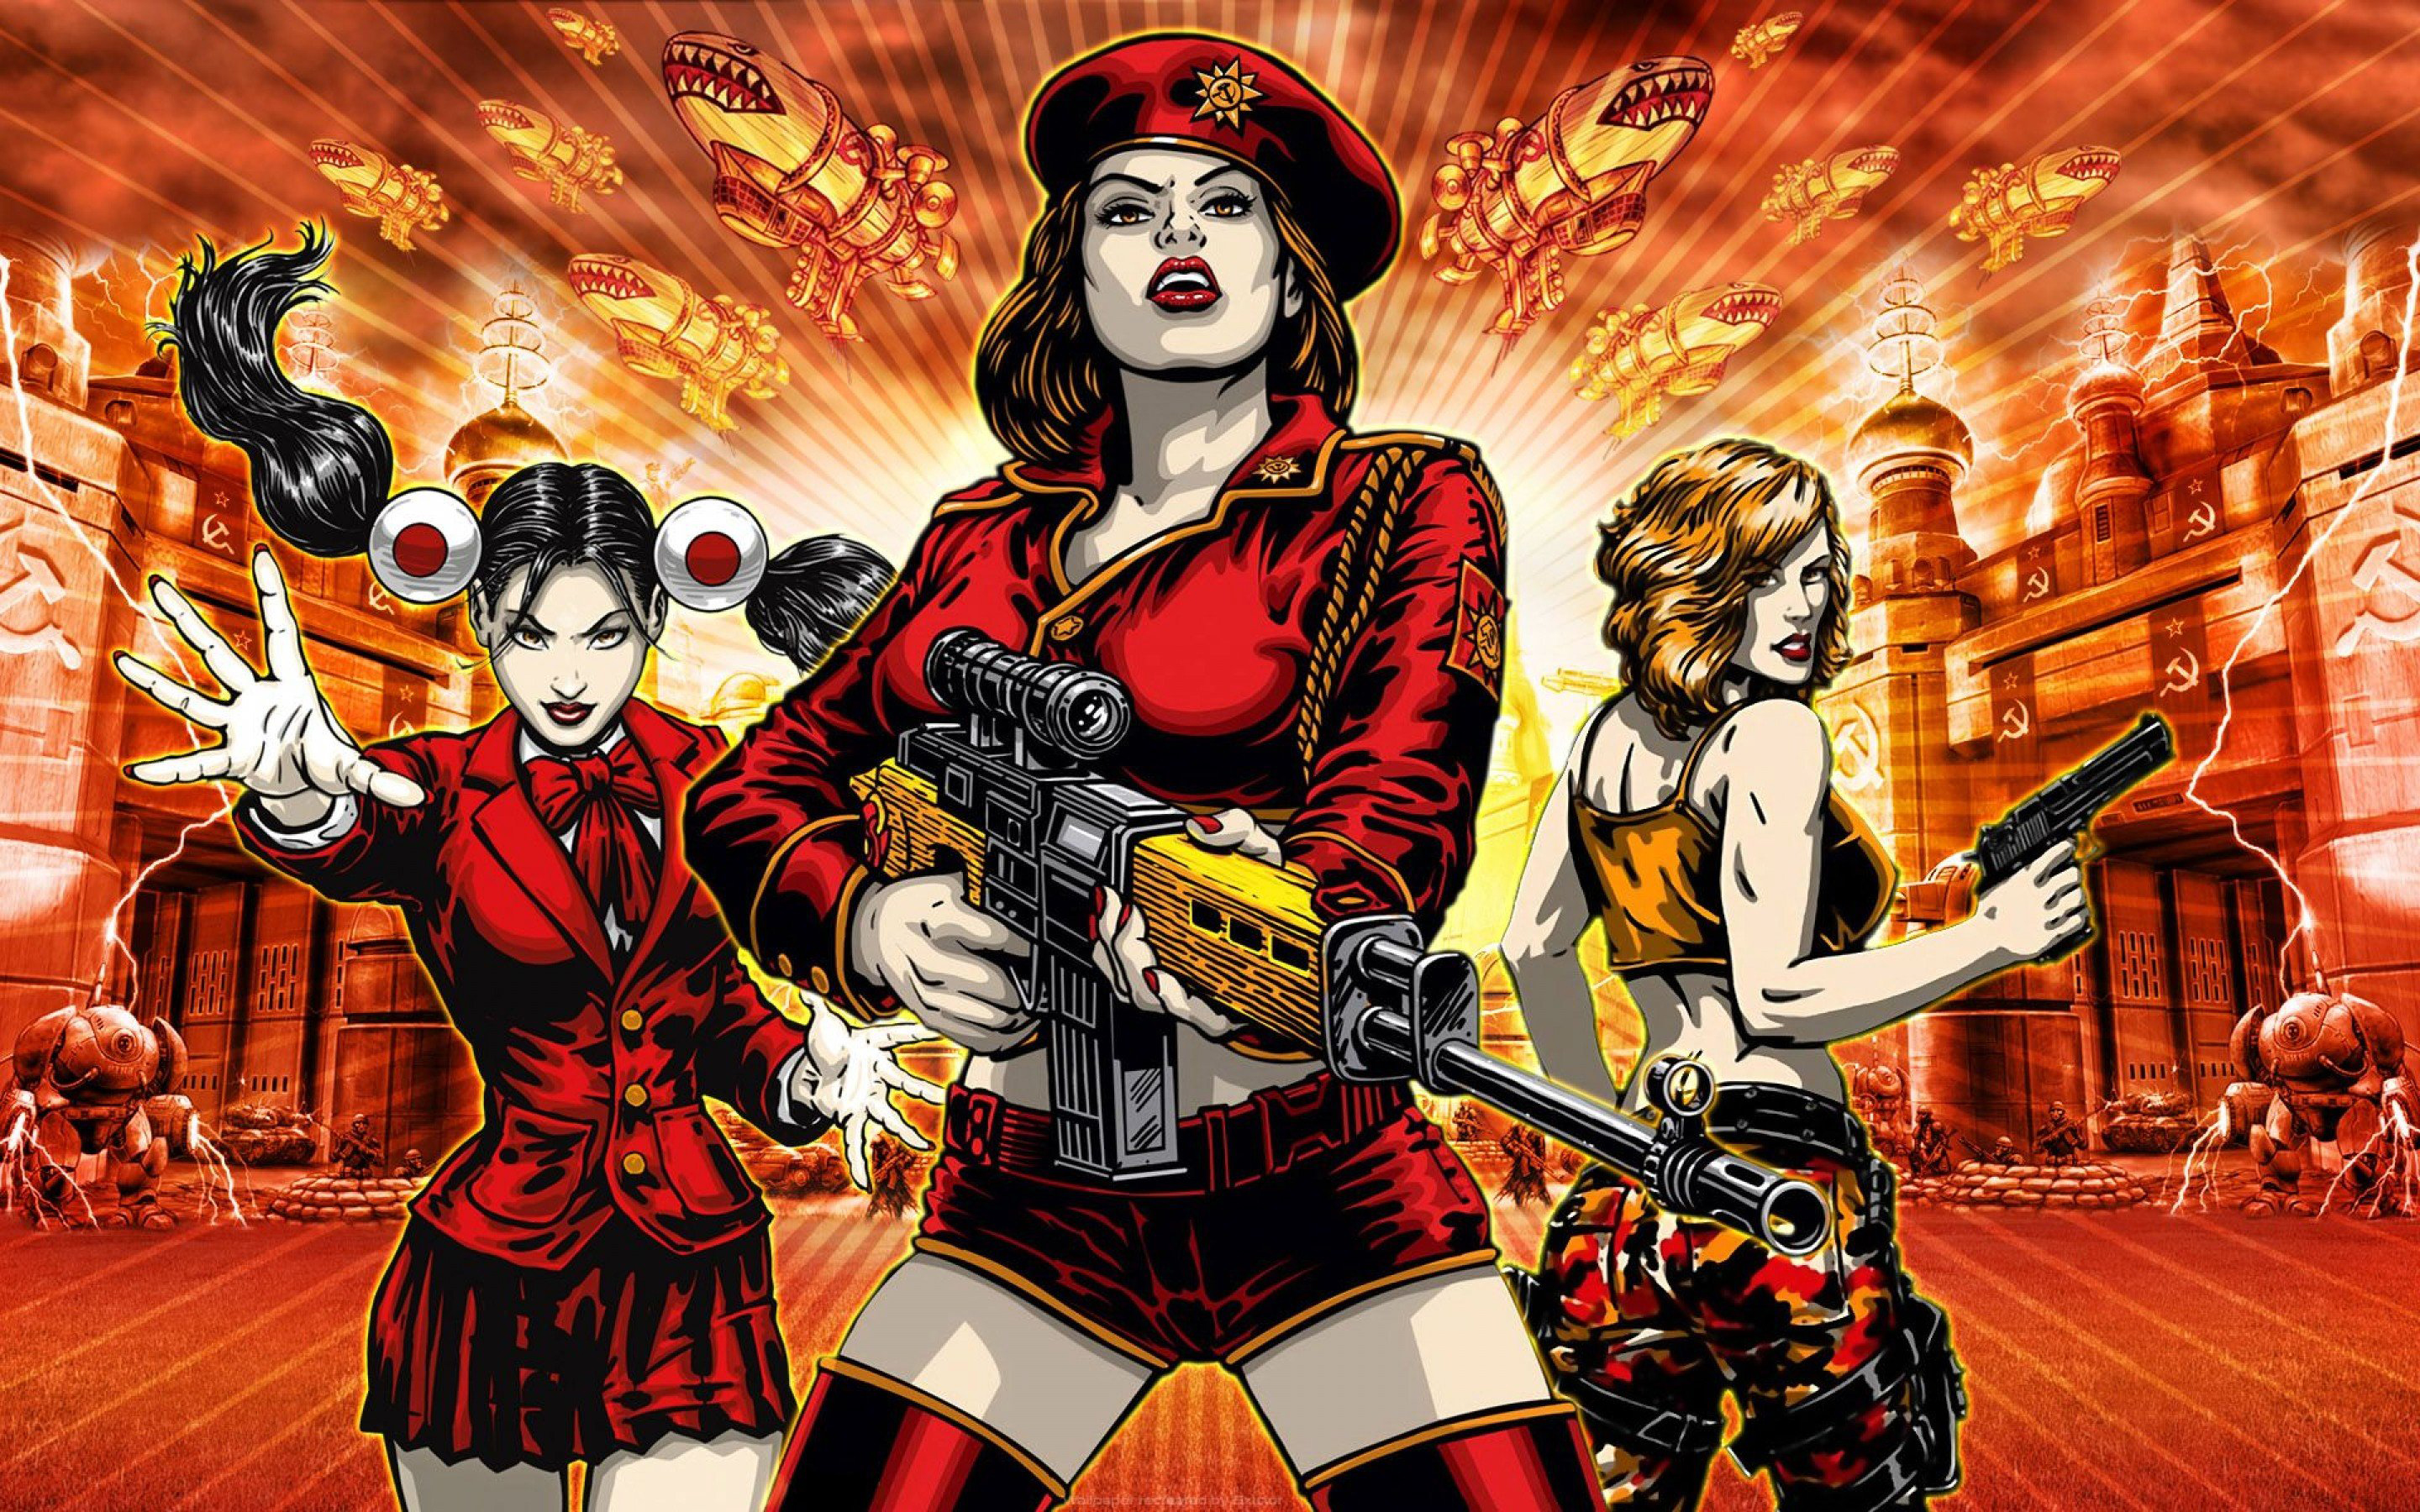 command and conquer red alert 1 download